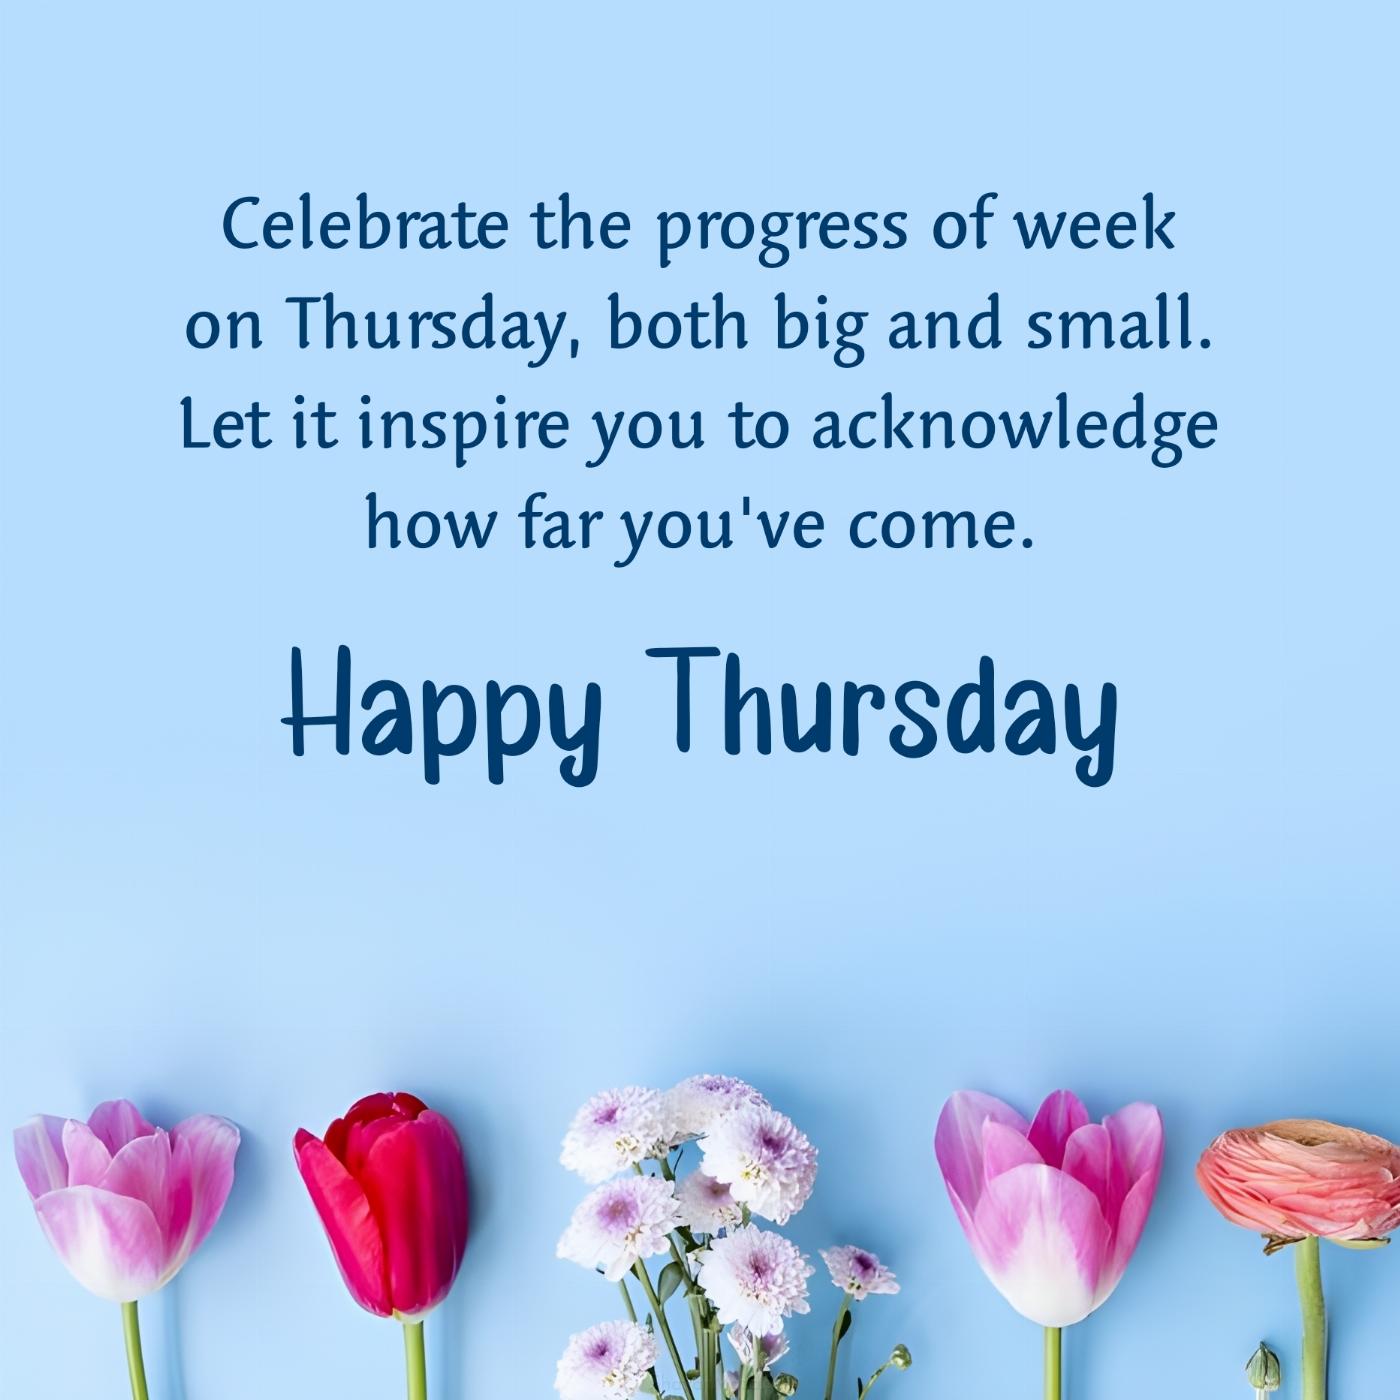 Celebrate the progress of week on Thursday both big and small